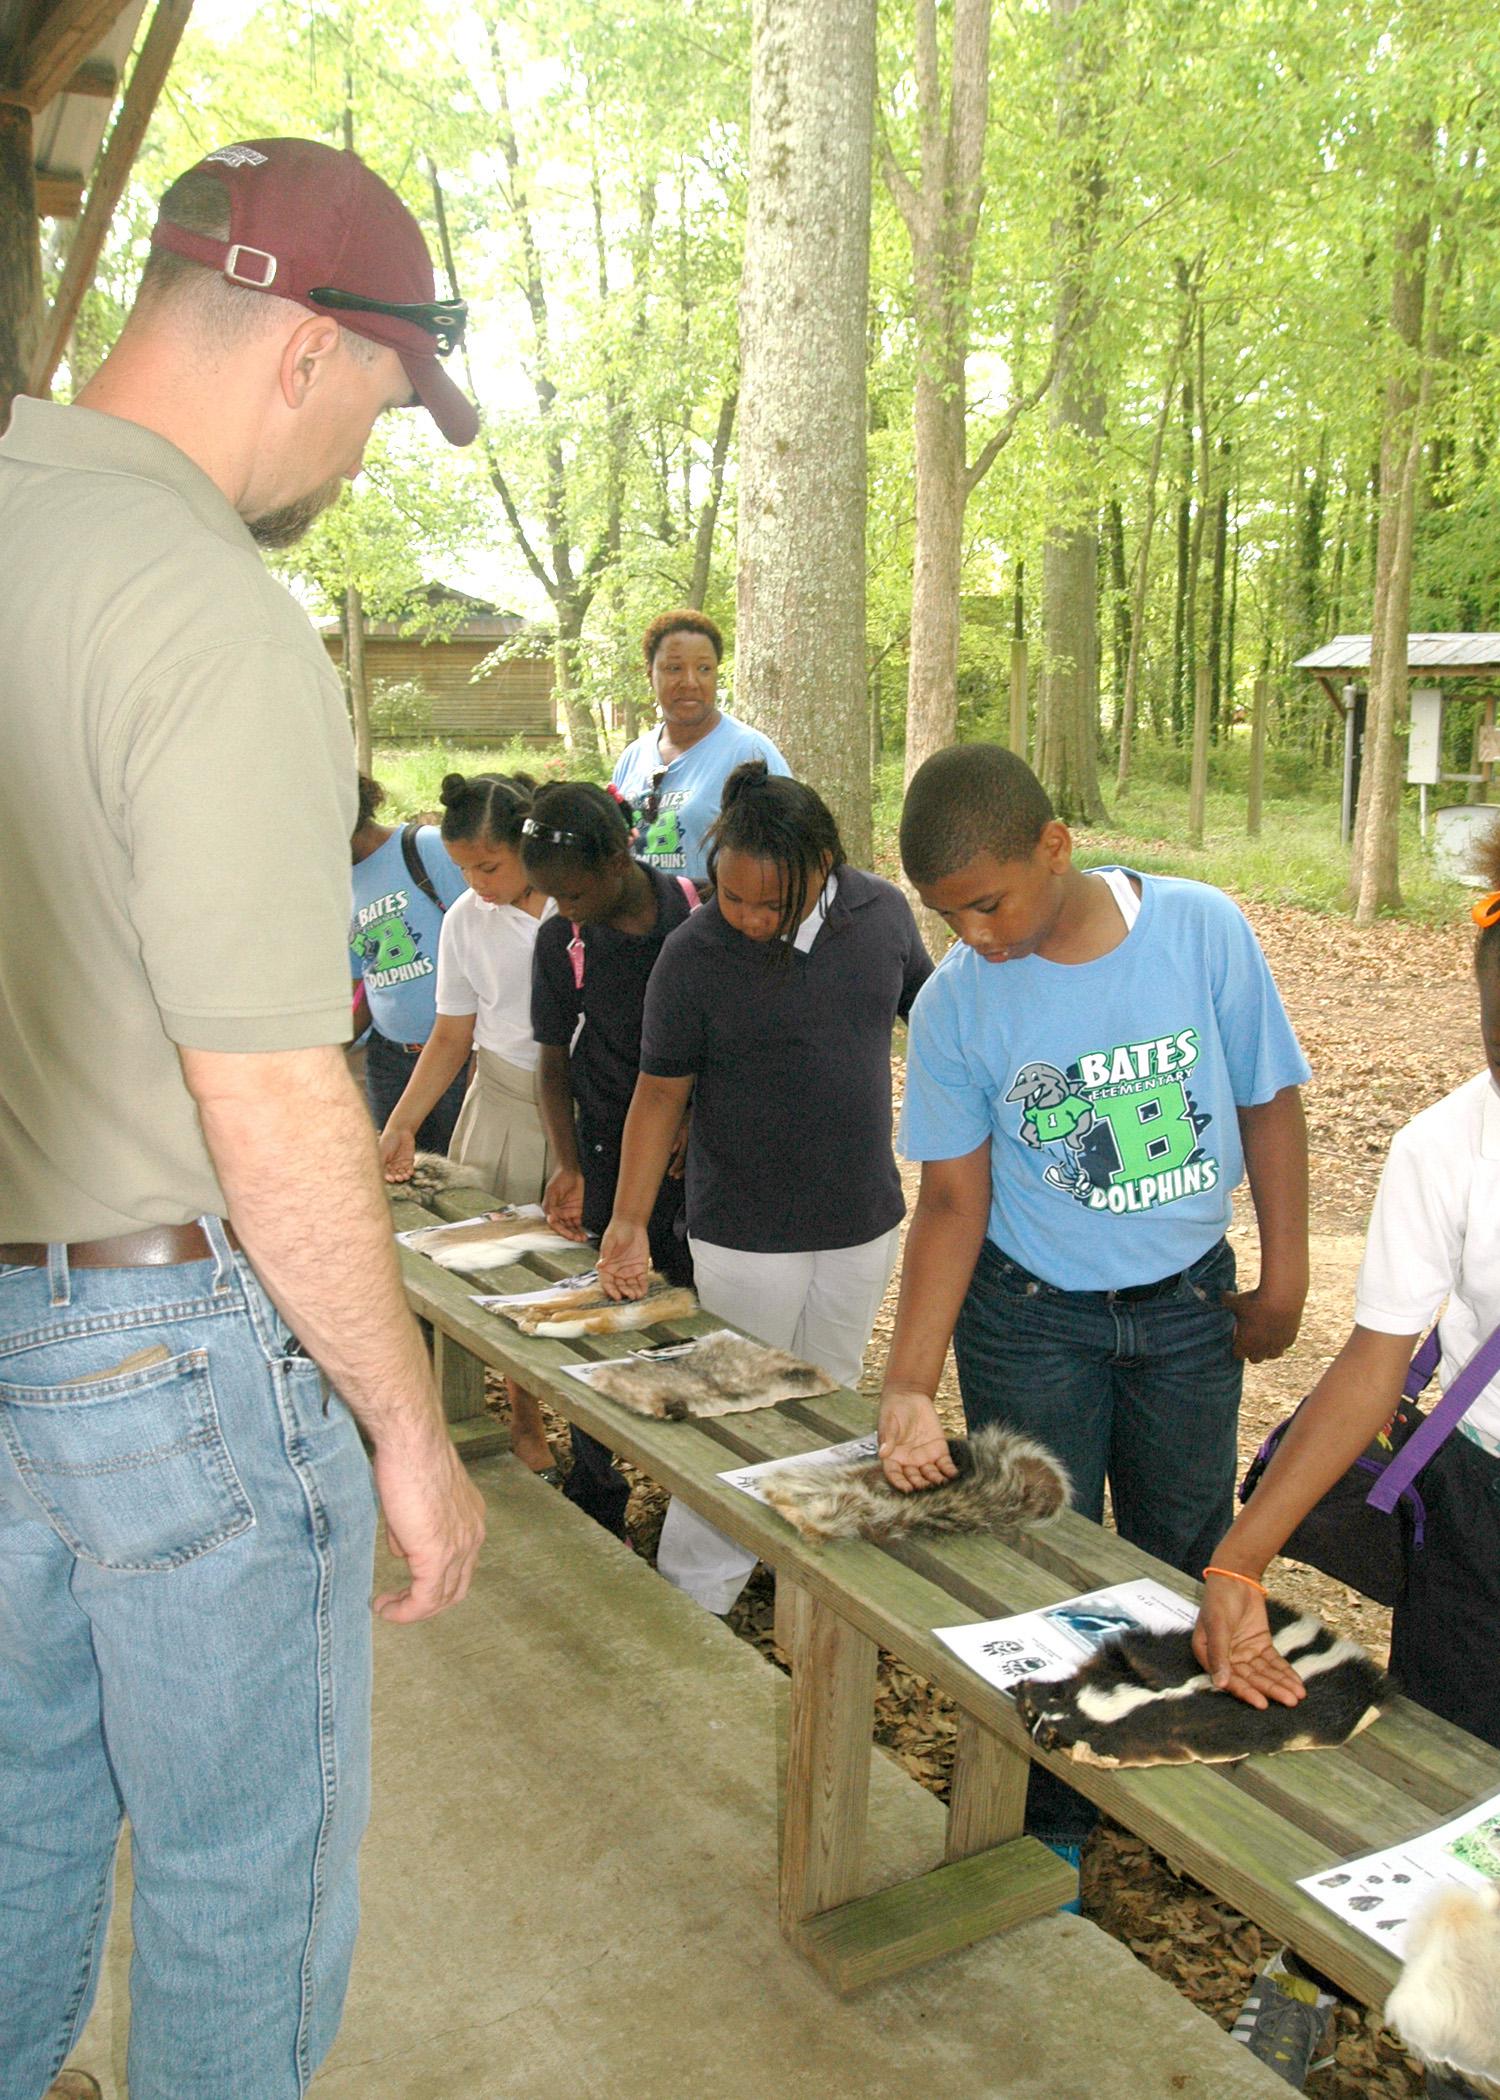 Ty Jones, county coordinator with Mississippi State University's Extension Service in Madison County, looks on as Bates Elementary fourth-graders feel the pelts of wild animals native to Mississippi, such as the skunk and raccoon. The display was part of the Extension-sponsored AgVentures at the Mississippi Agricultural and Forestry Museum in Jackson April 16 and 17. (Photo by MSU Ag Communications/Susan Collins-Smith)